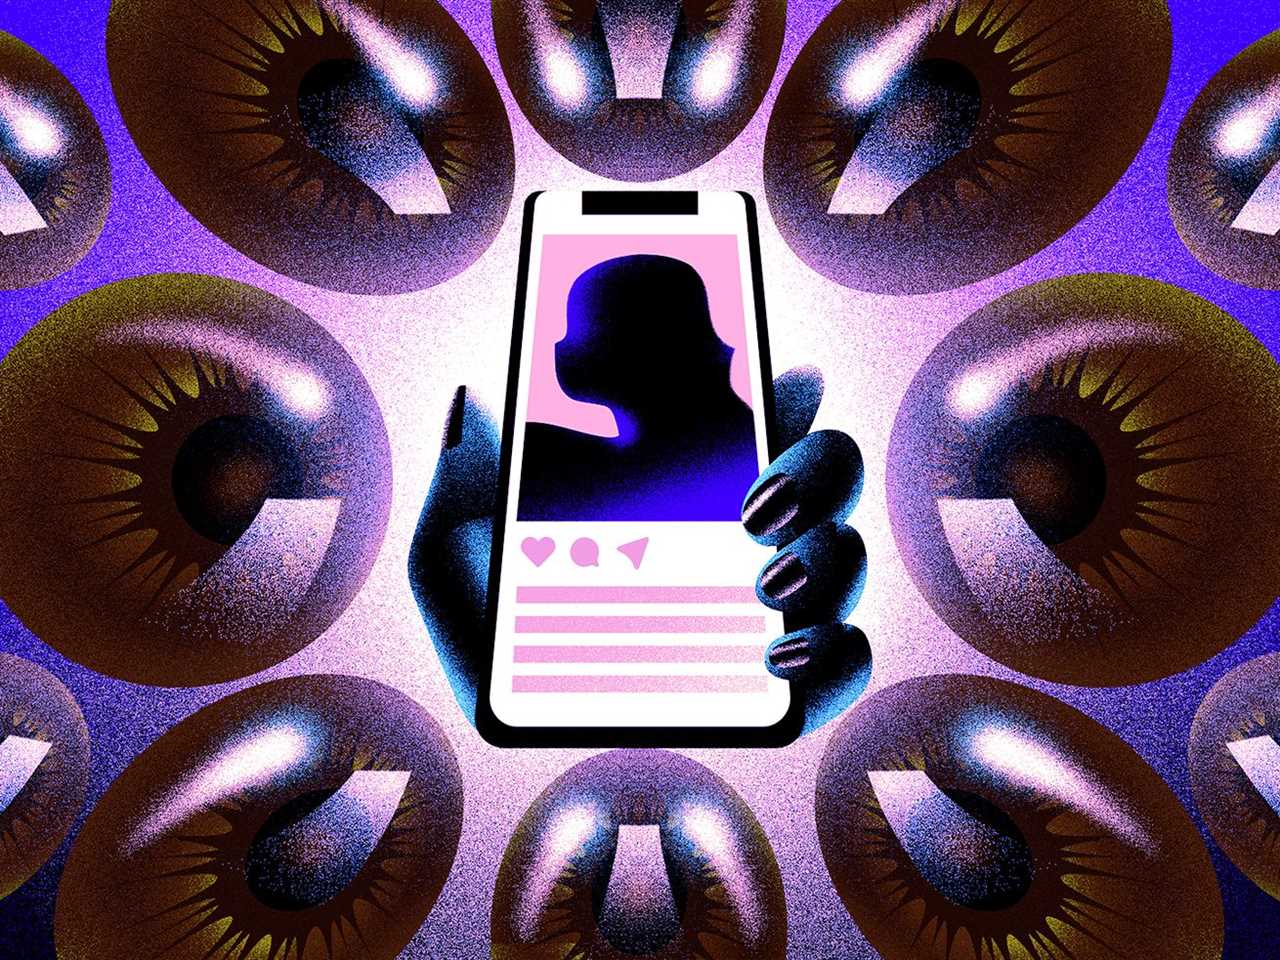 A hand is holding a cell phone. Giant eyeballs surround the phone, all focusing on a woman’s instagram post.